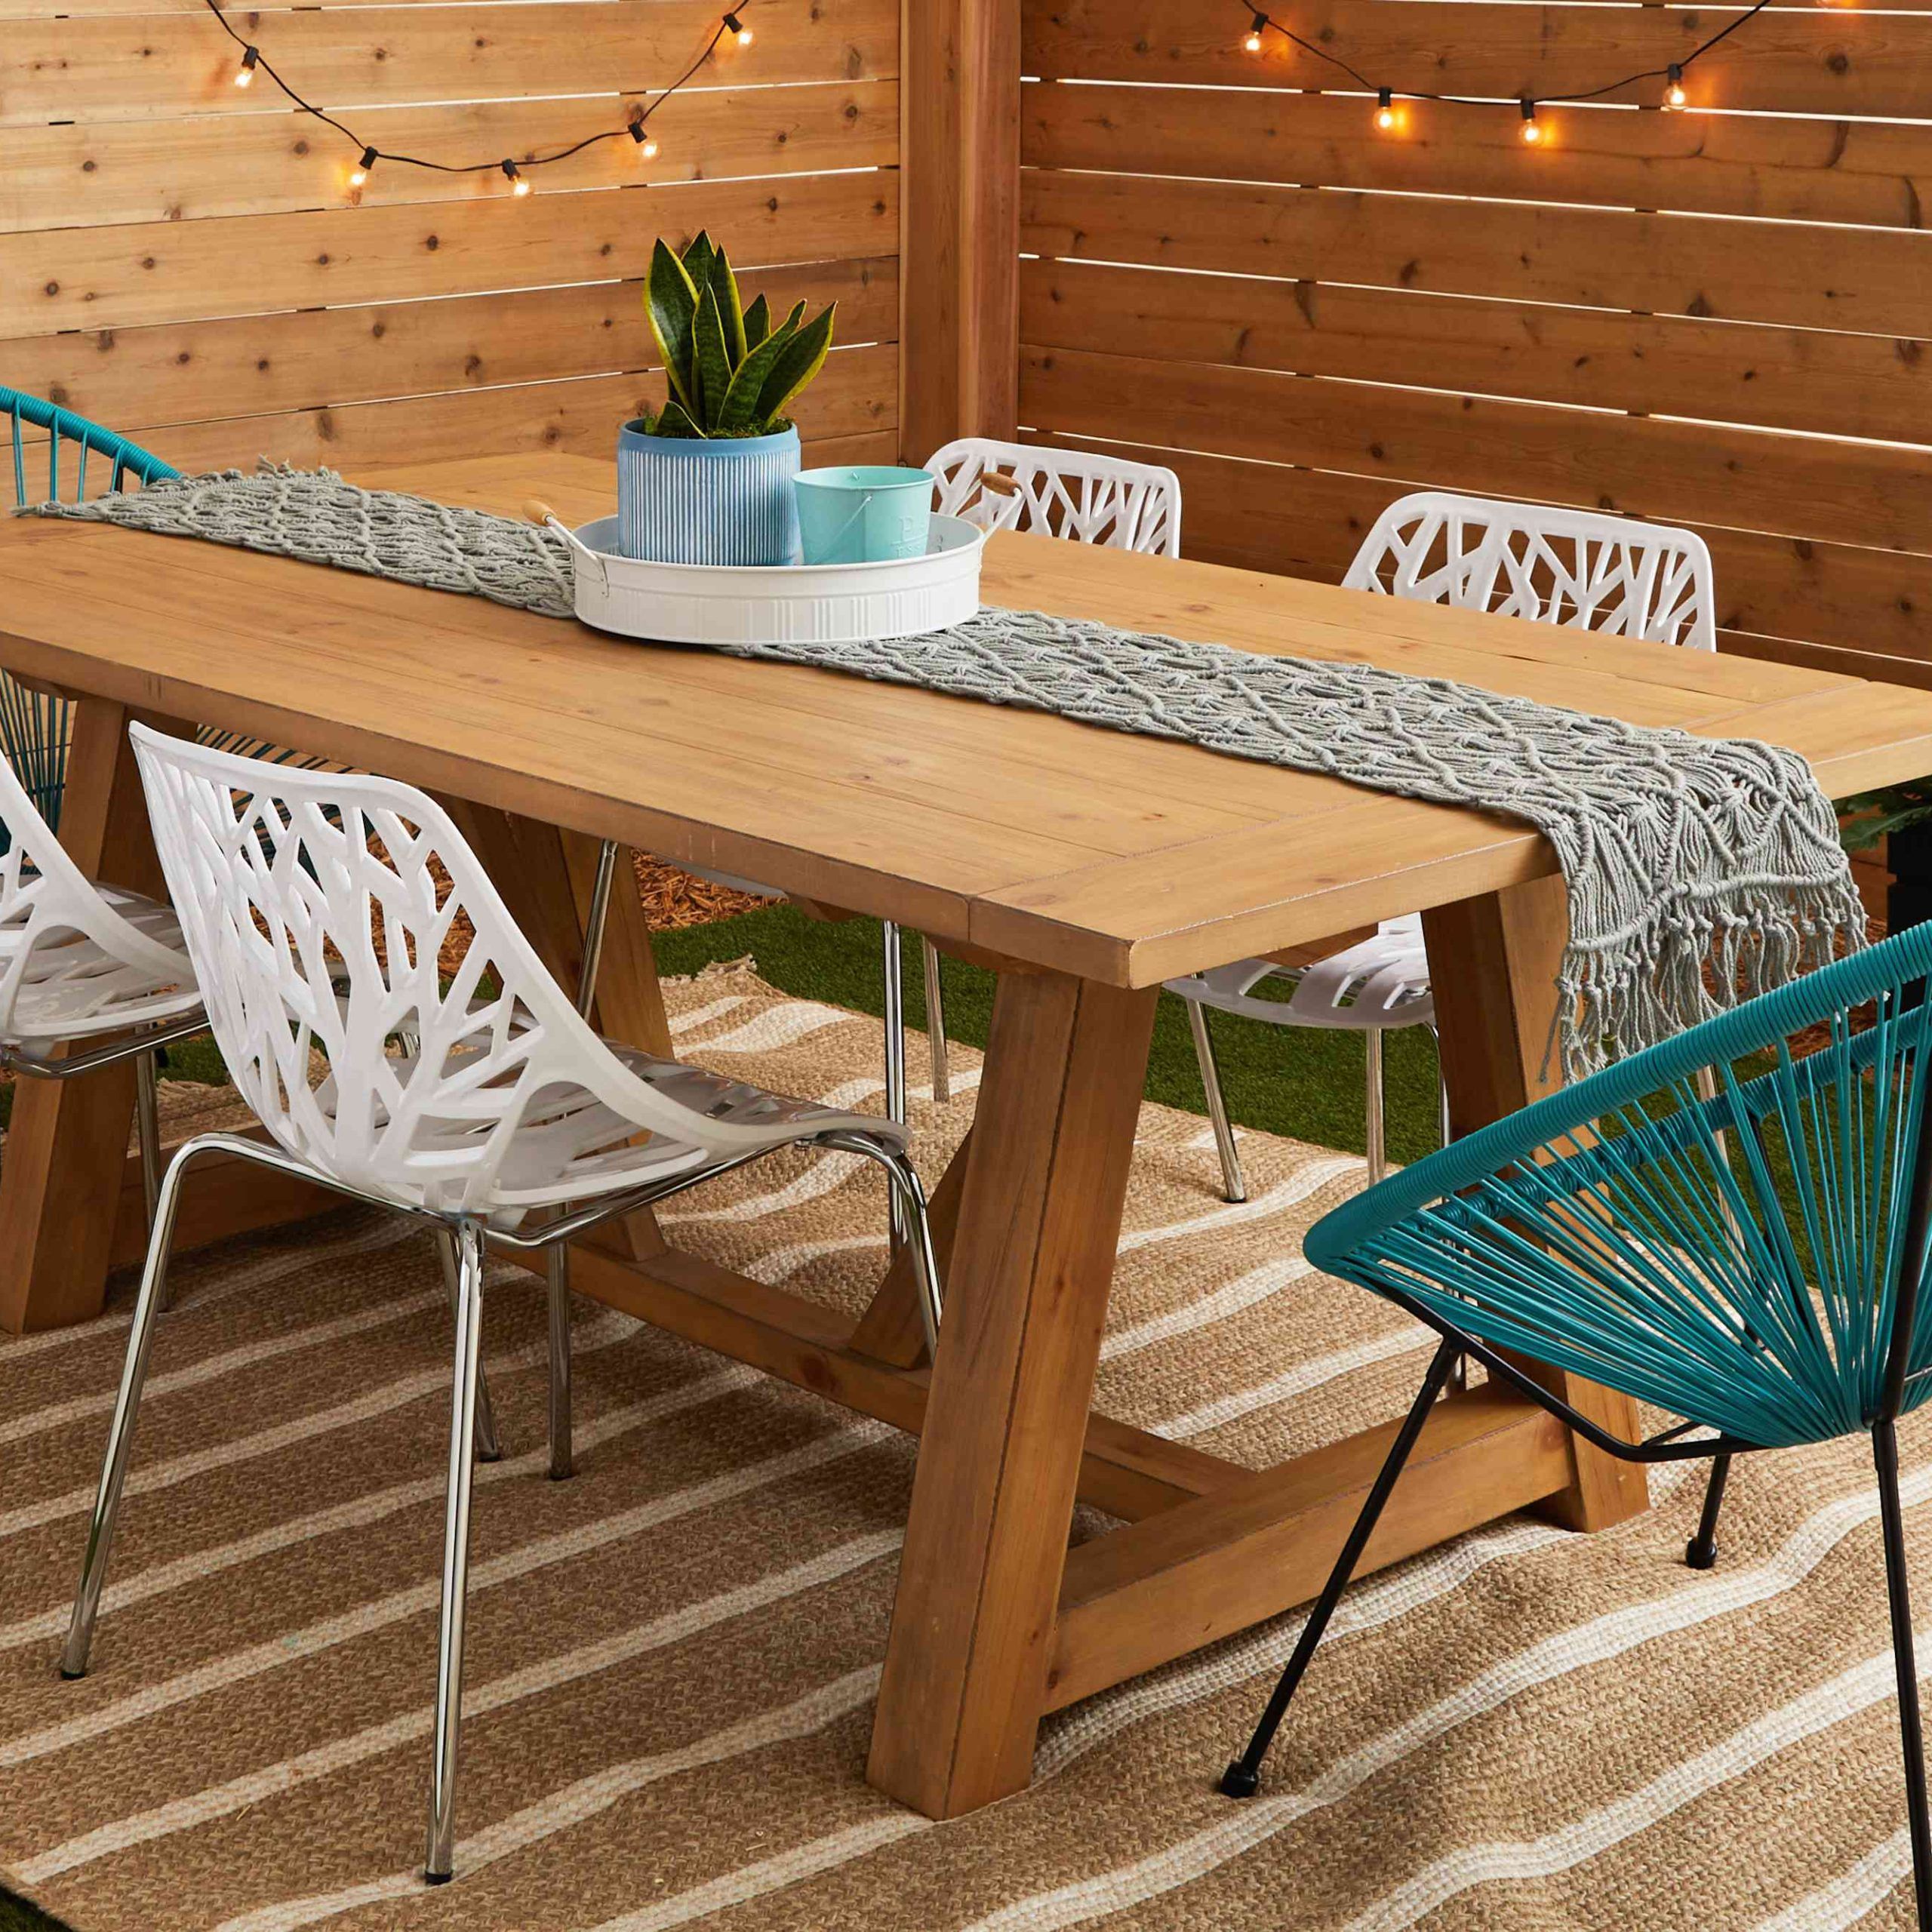 18 Diy Outdoor Table Plans Within Outdoor Coffee Tables With Storage (View 11 of 15)